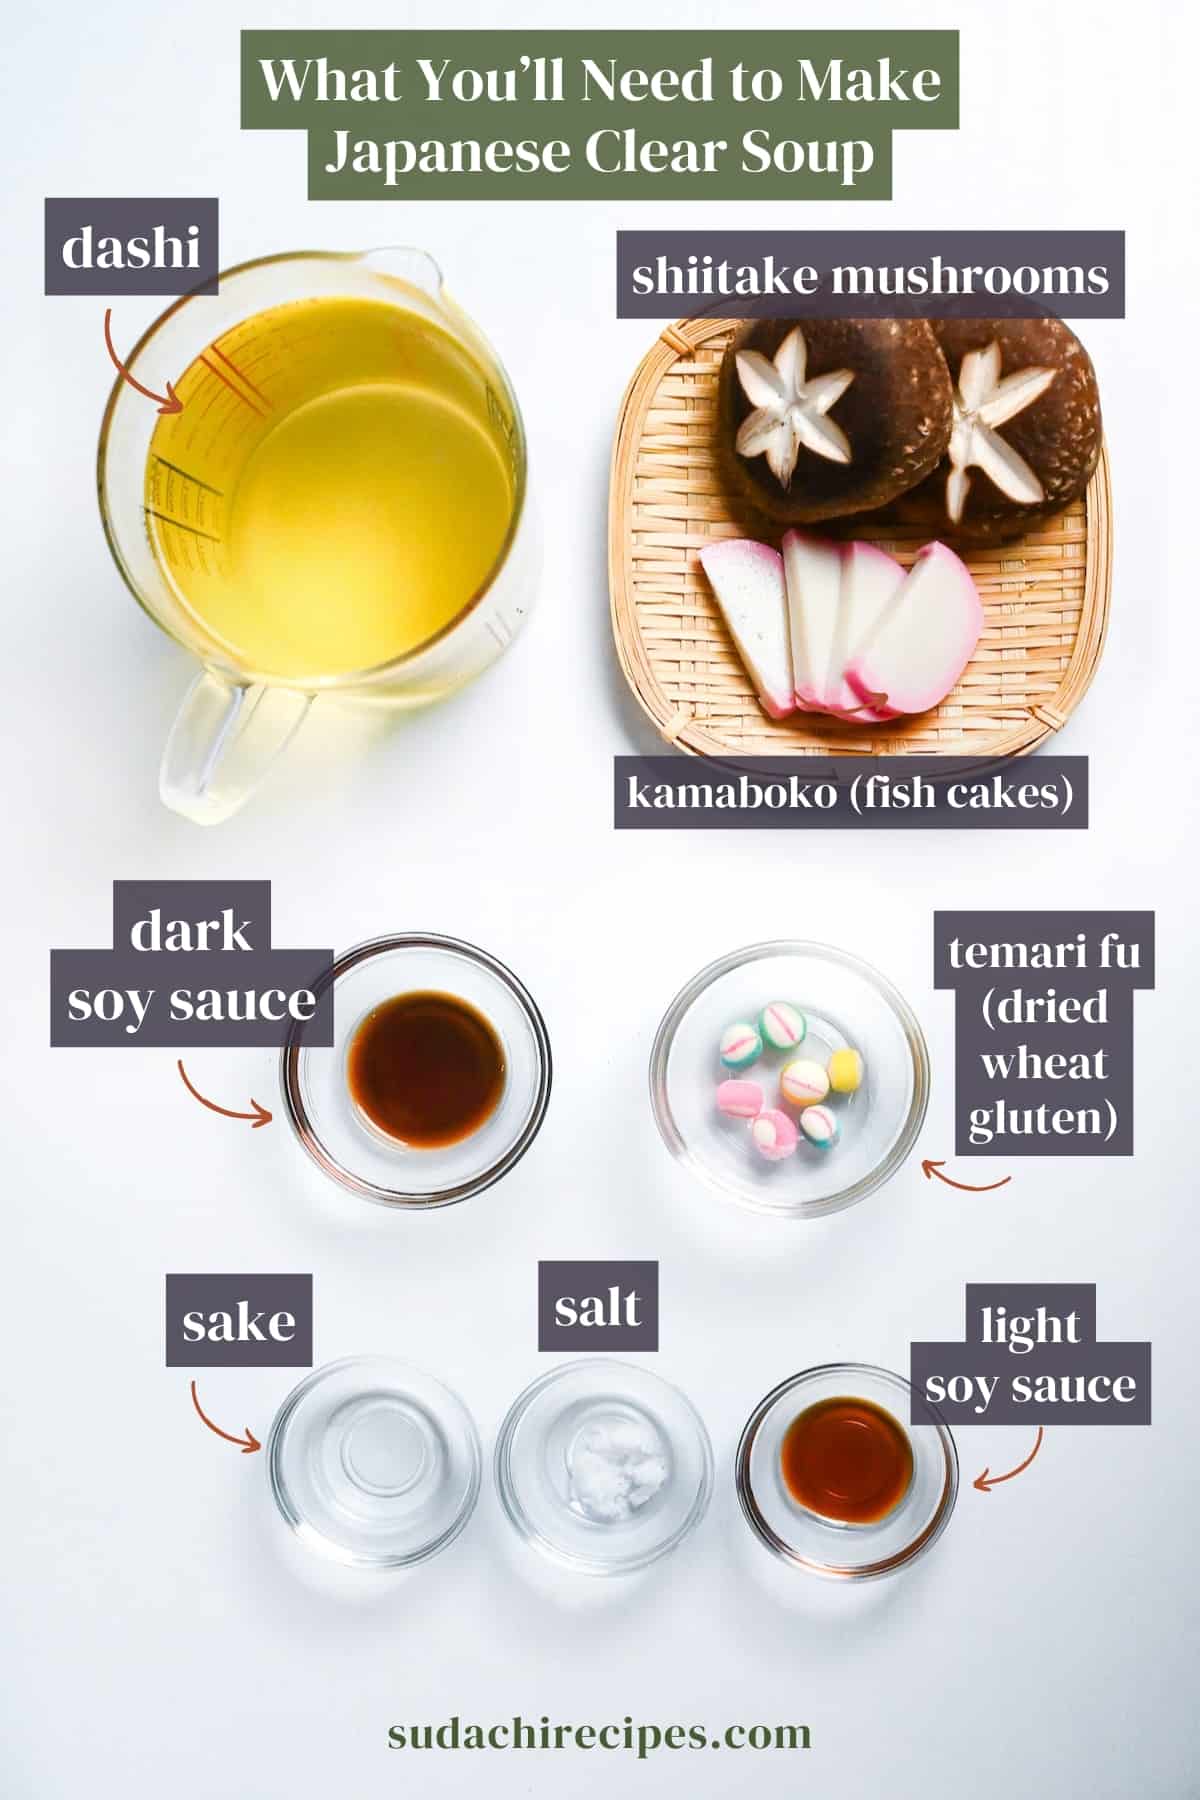 Ingredients used to make Japanese clear soup on a white background with labels